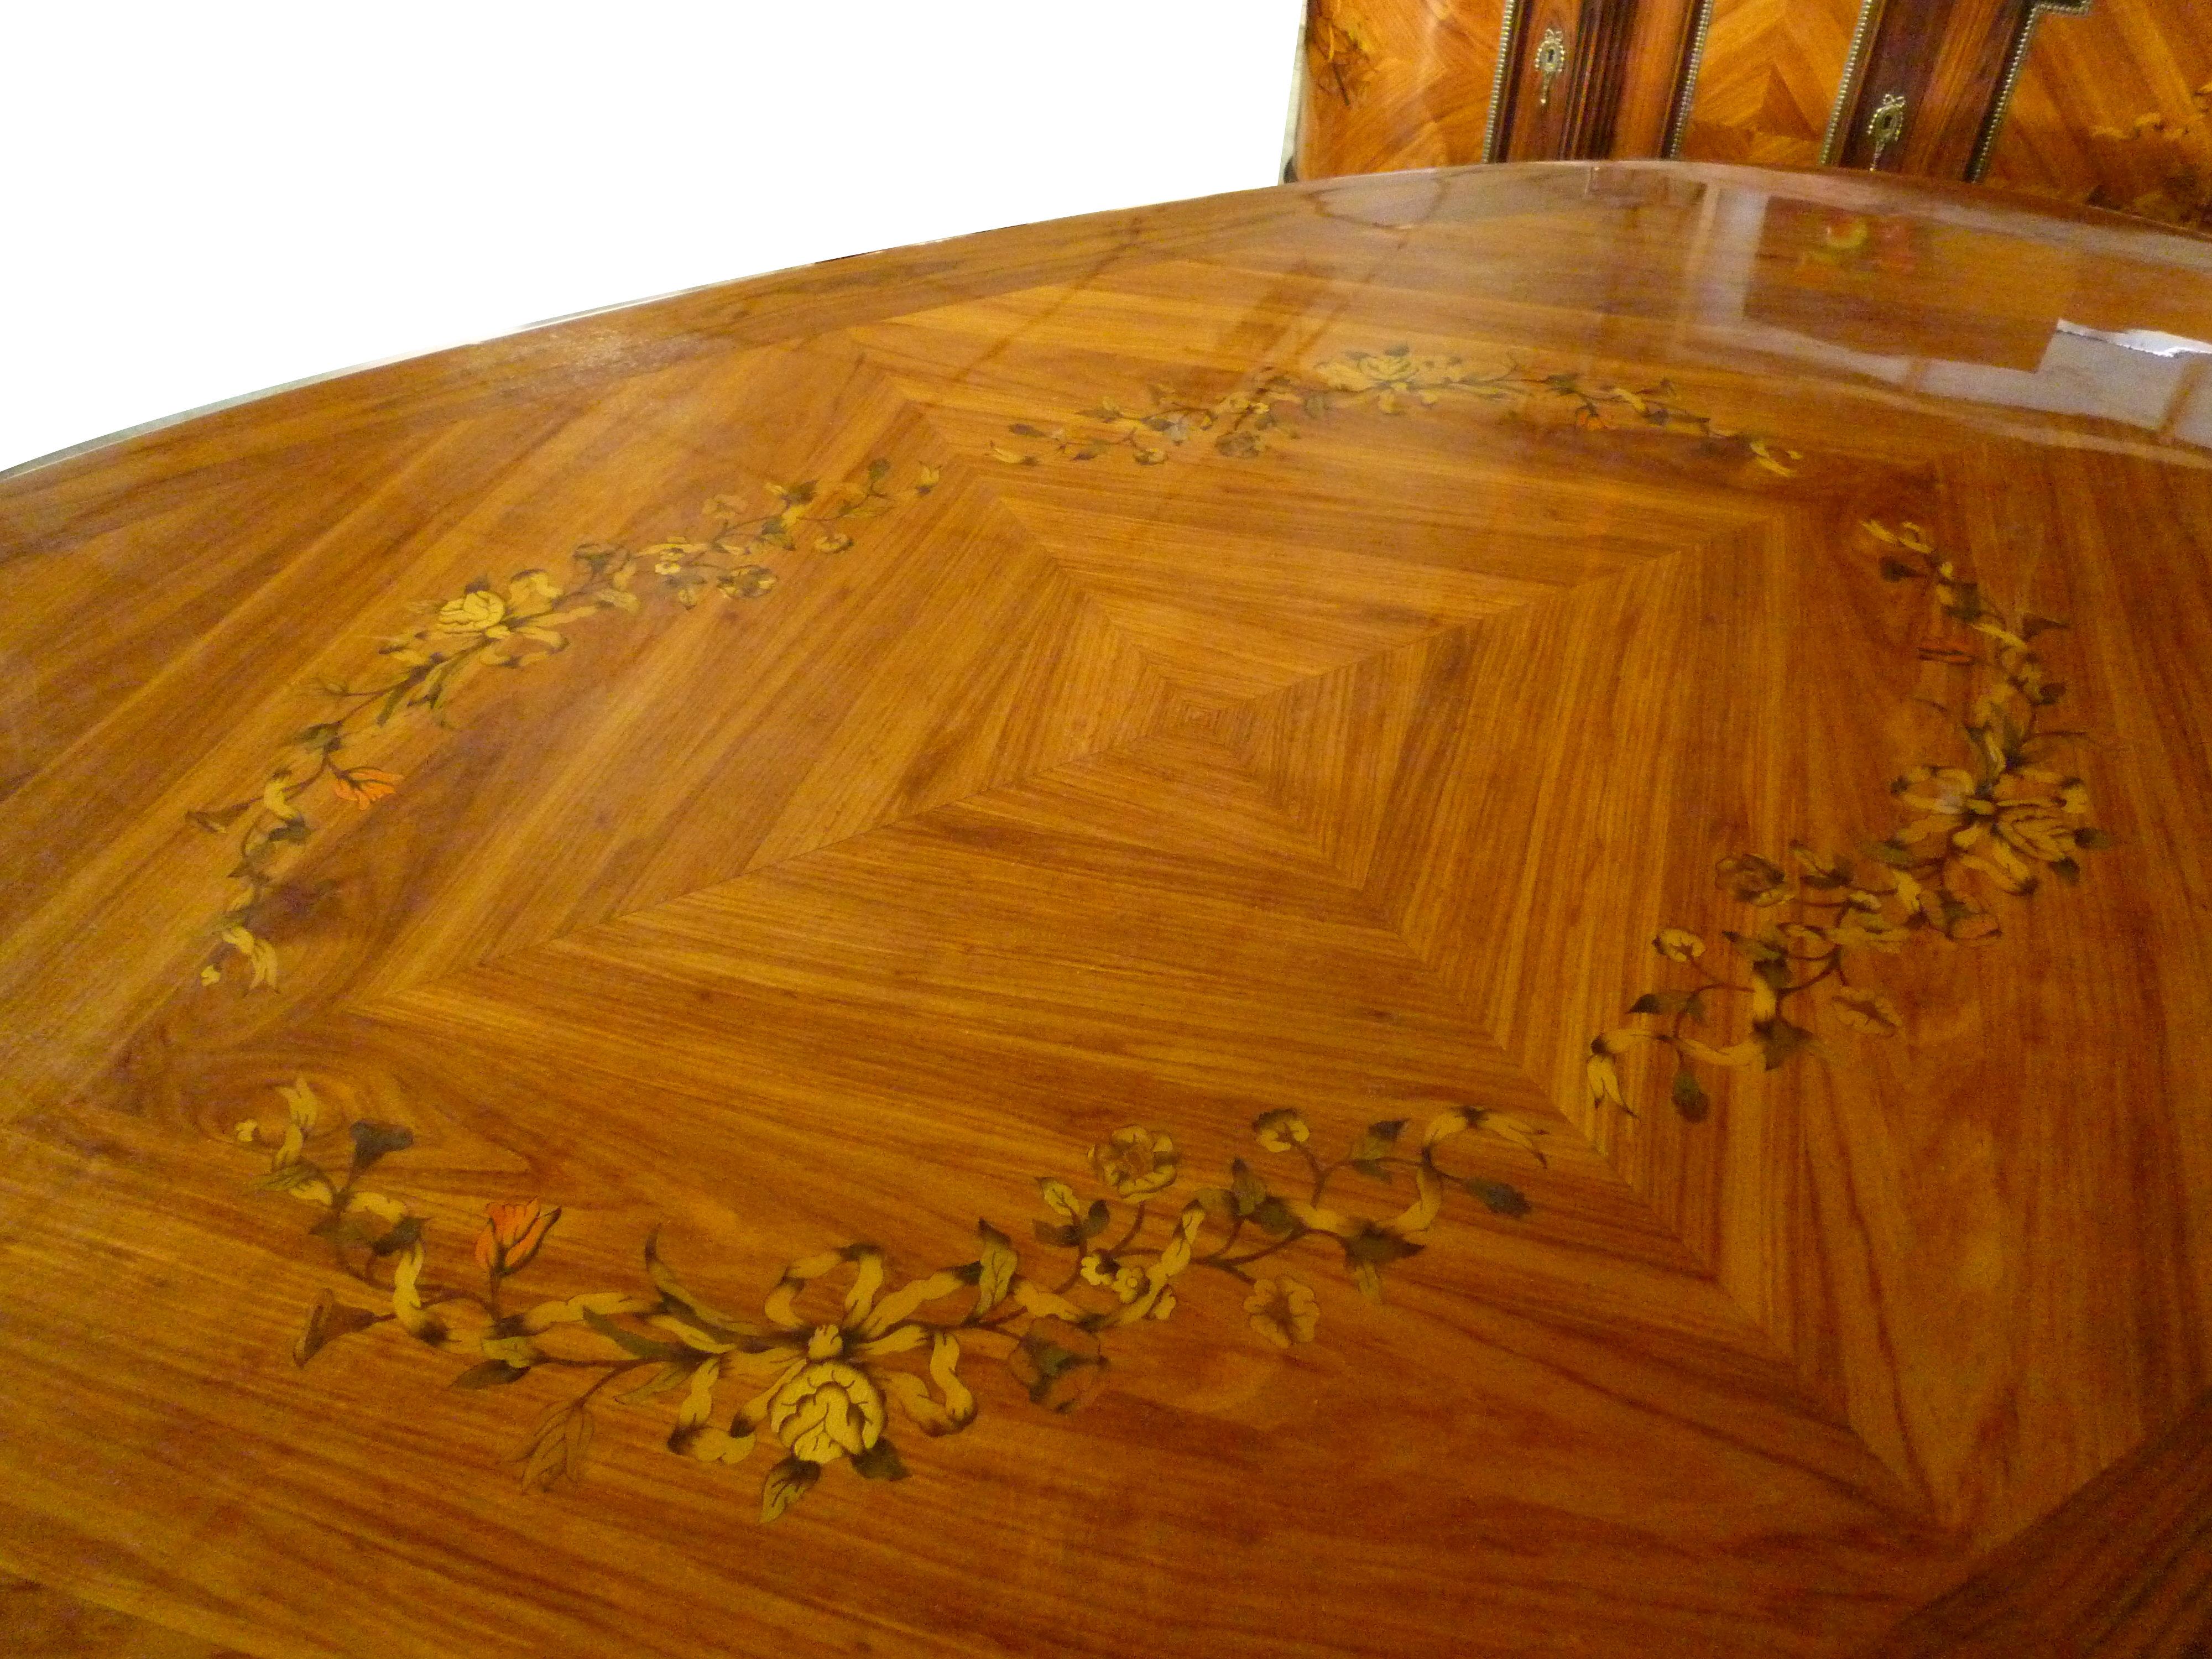 Oval dining table rosewood inlaid with flowers and gilt bronze decoration
By JP Ehalt French Marquetry dining table
JP Ehalt is a well renowned and reputable manufacturer in France.
The Ehalt Fine furniture company was founded in 1924 in